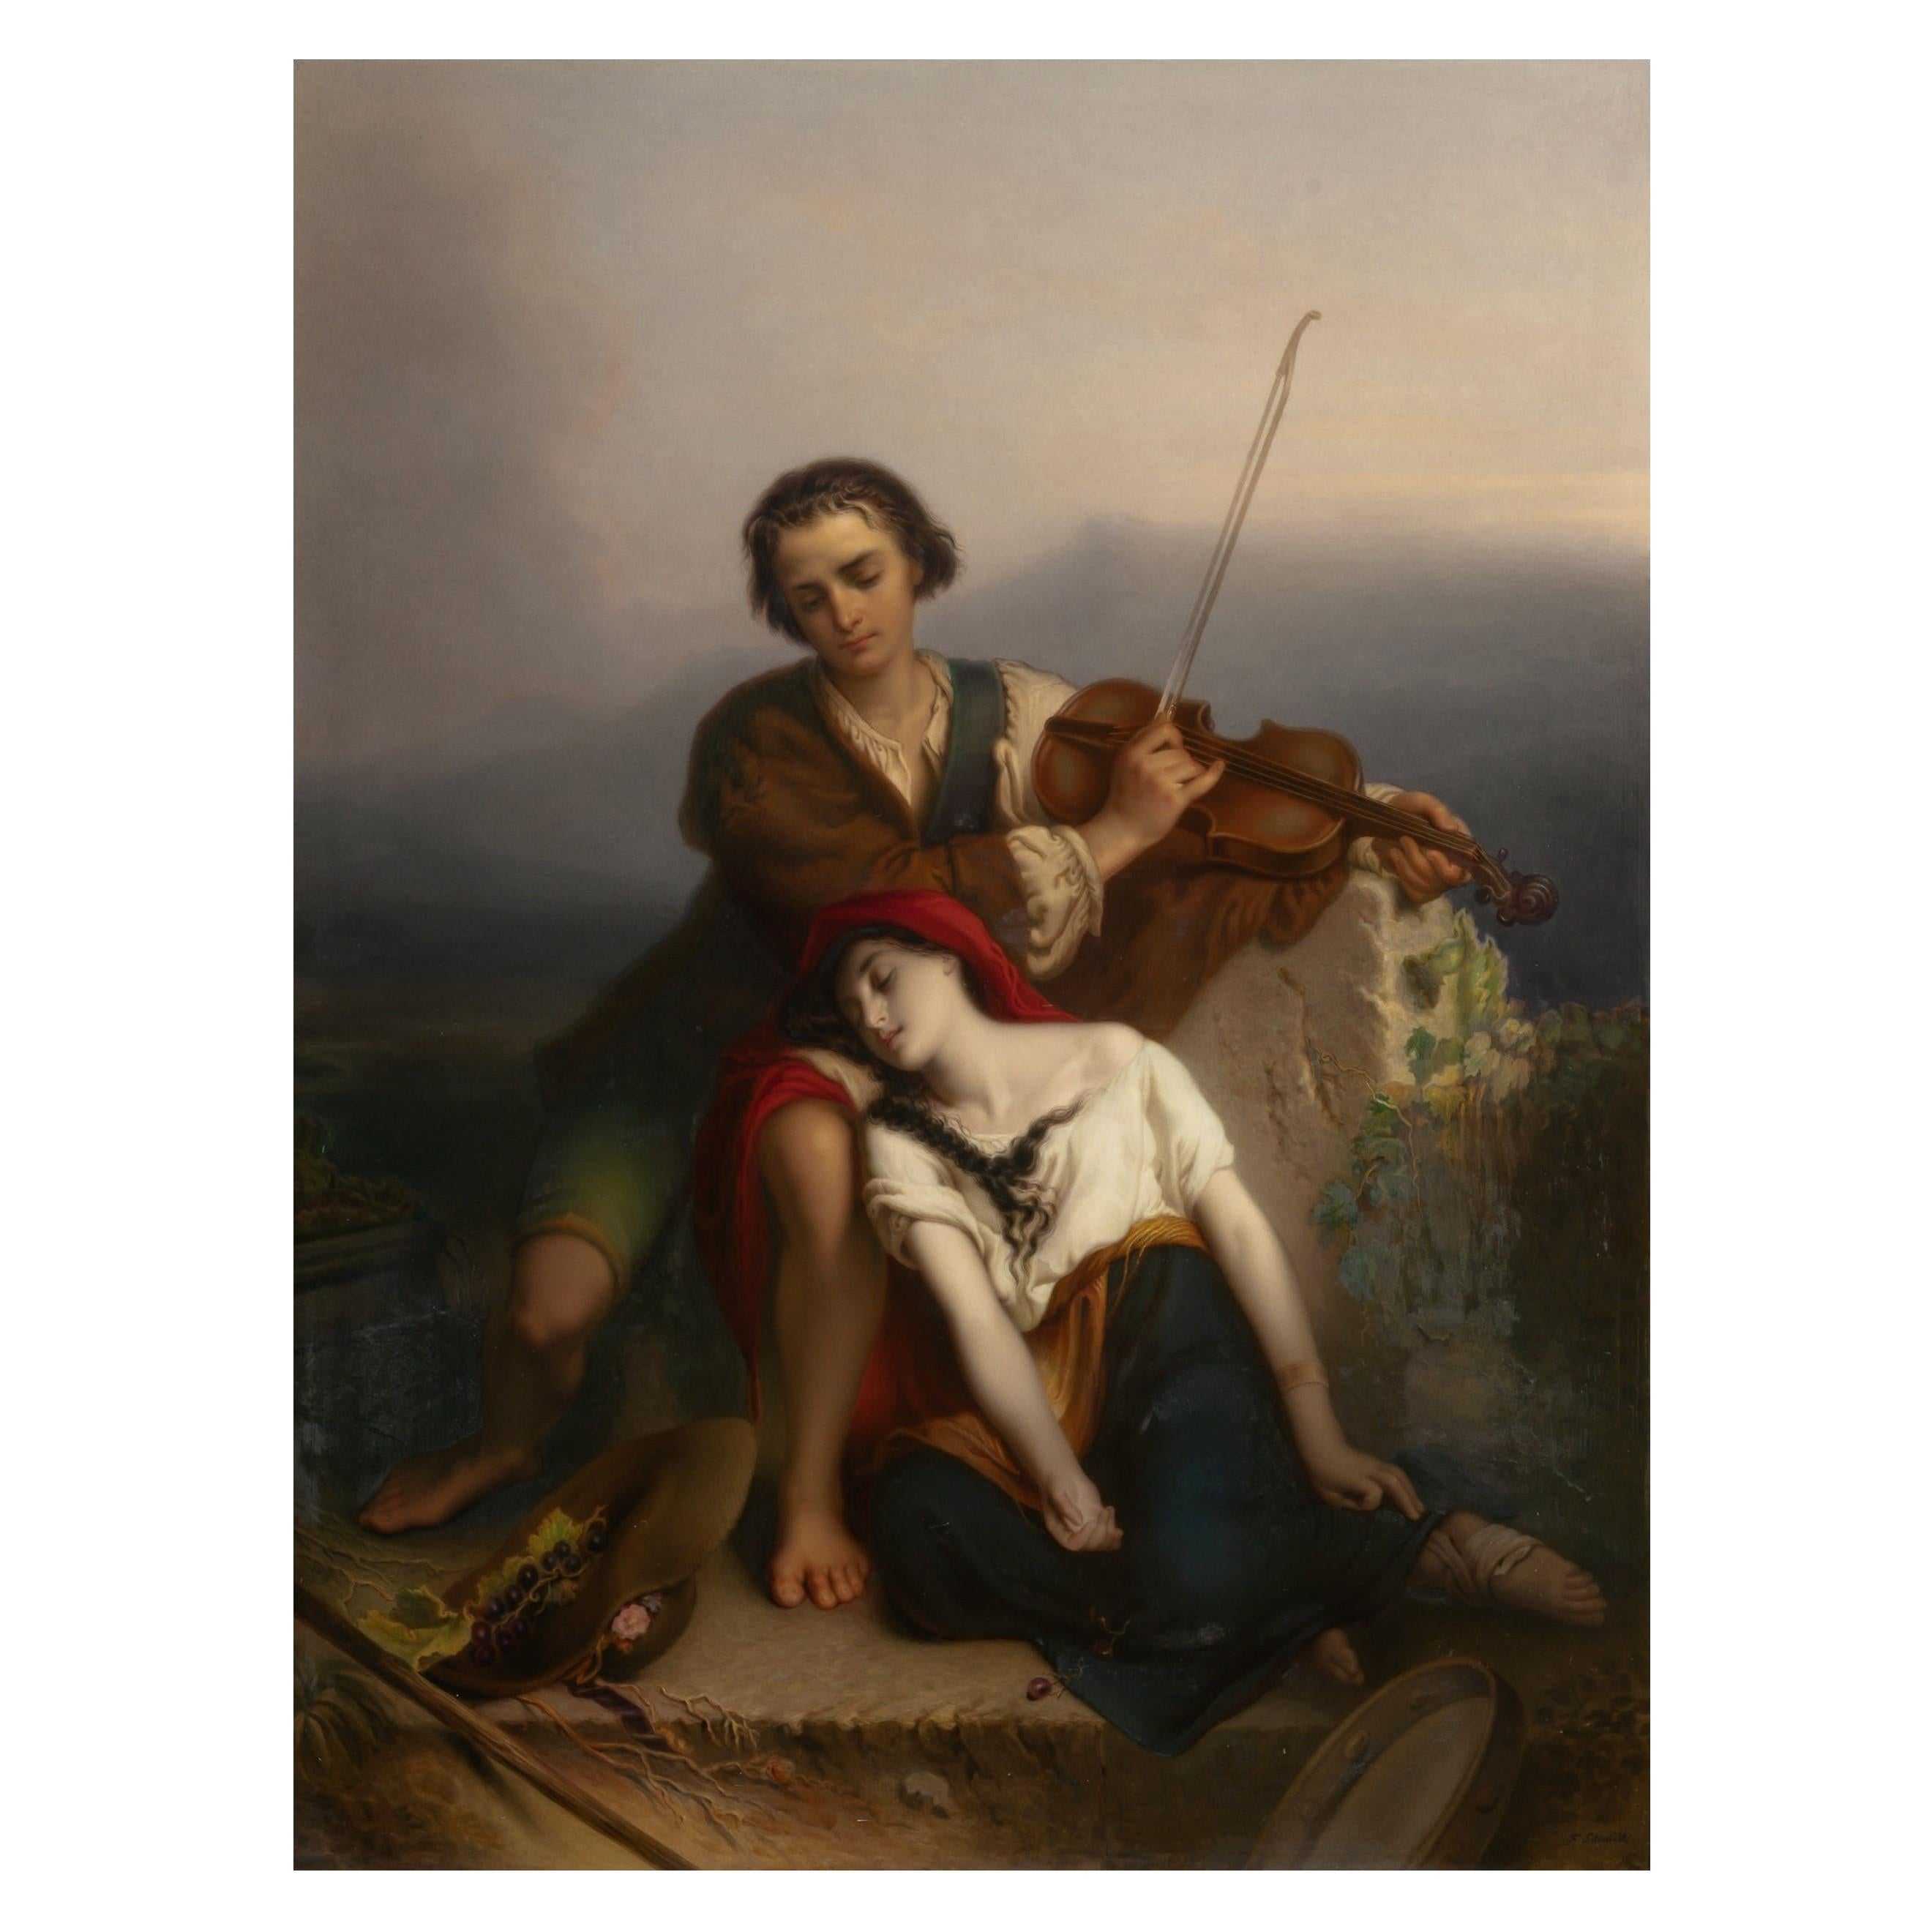 Our very large plaque, 20 by 26.5 inches (51 by 67 cm), is known as the Fiddler and Gypsy Woman, and Consolation, after the painting by Louis Gallait (Belgian, 1810-1887) that resides in the collection of the National Museum in Warsaw.  Wonderfully